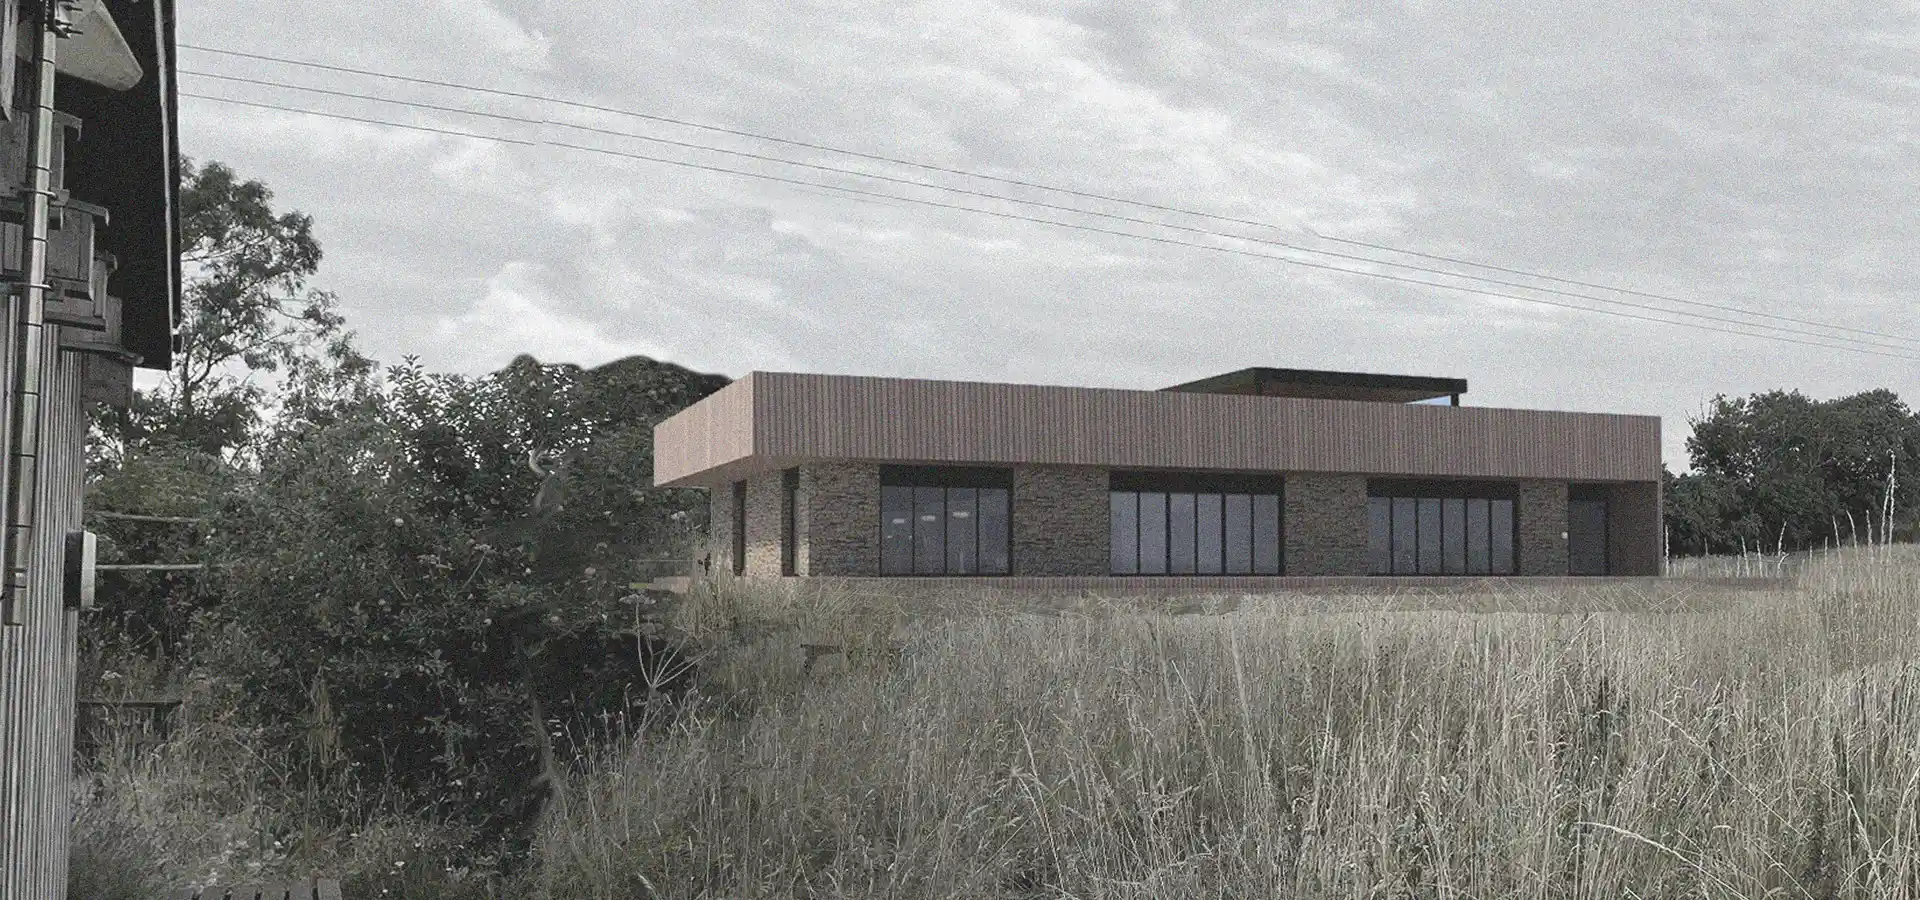 architect's visualisation of the Lower Derwent Valley new research base